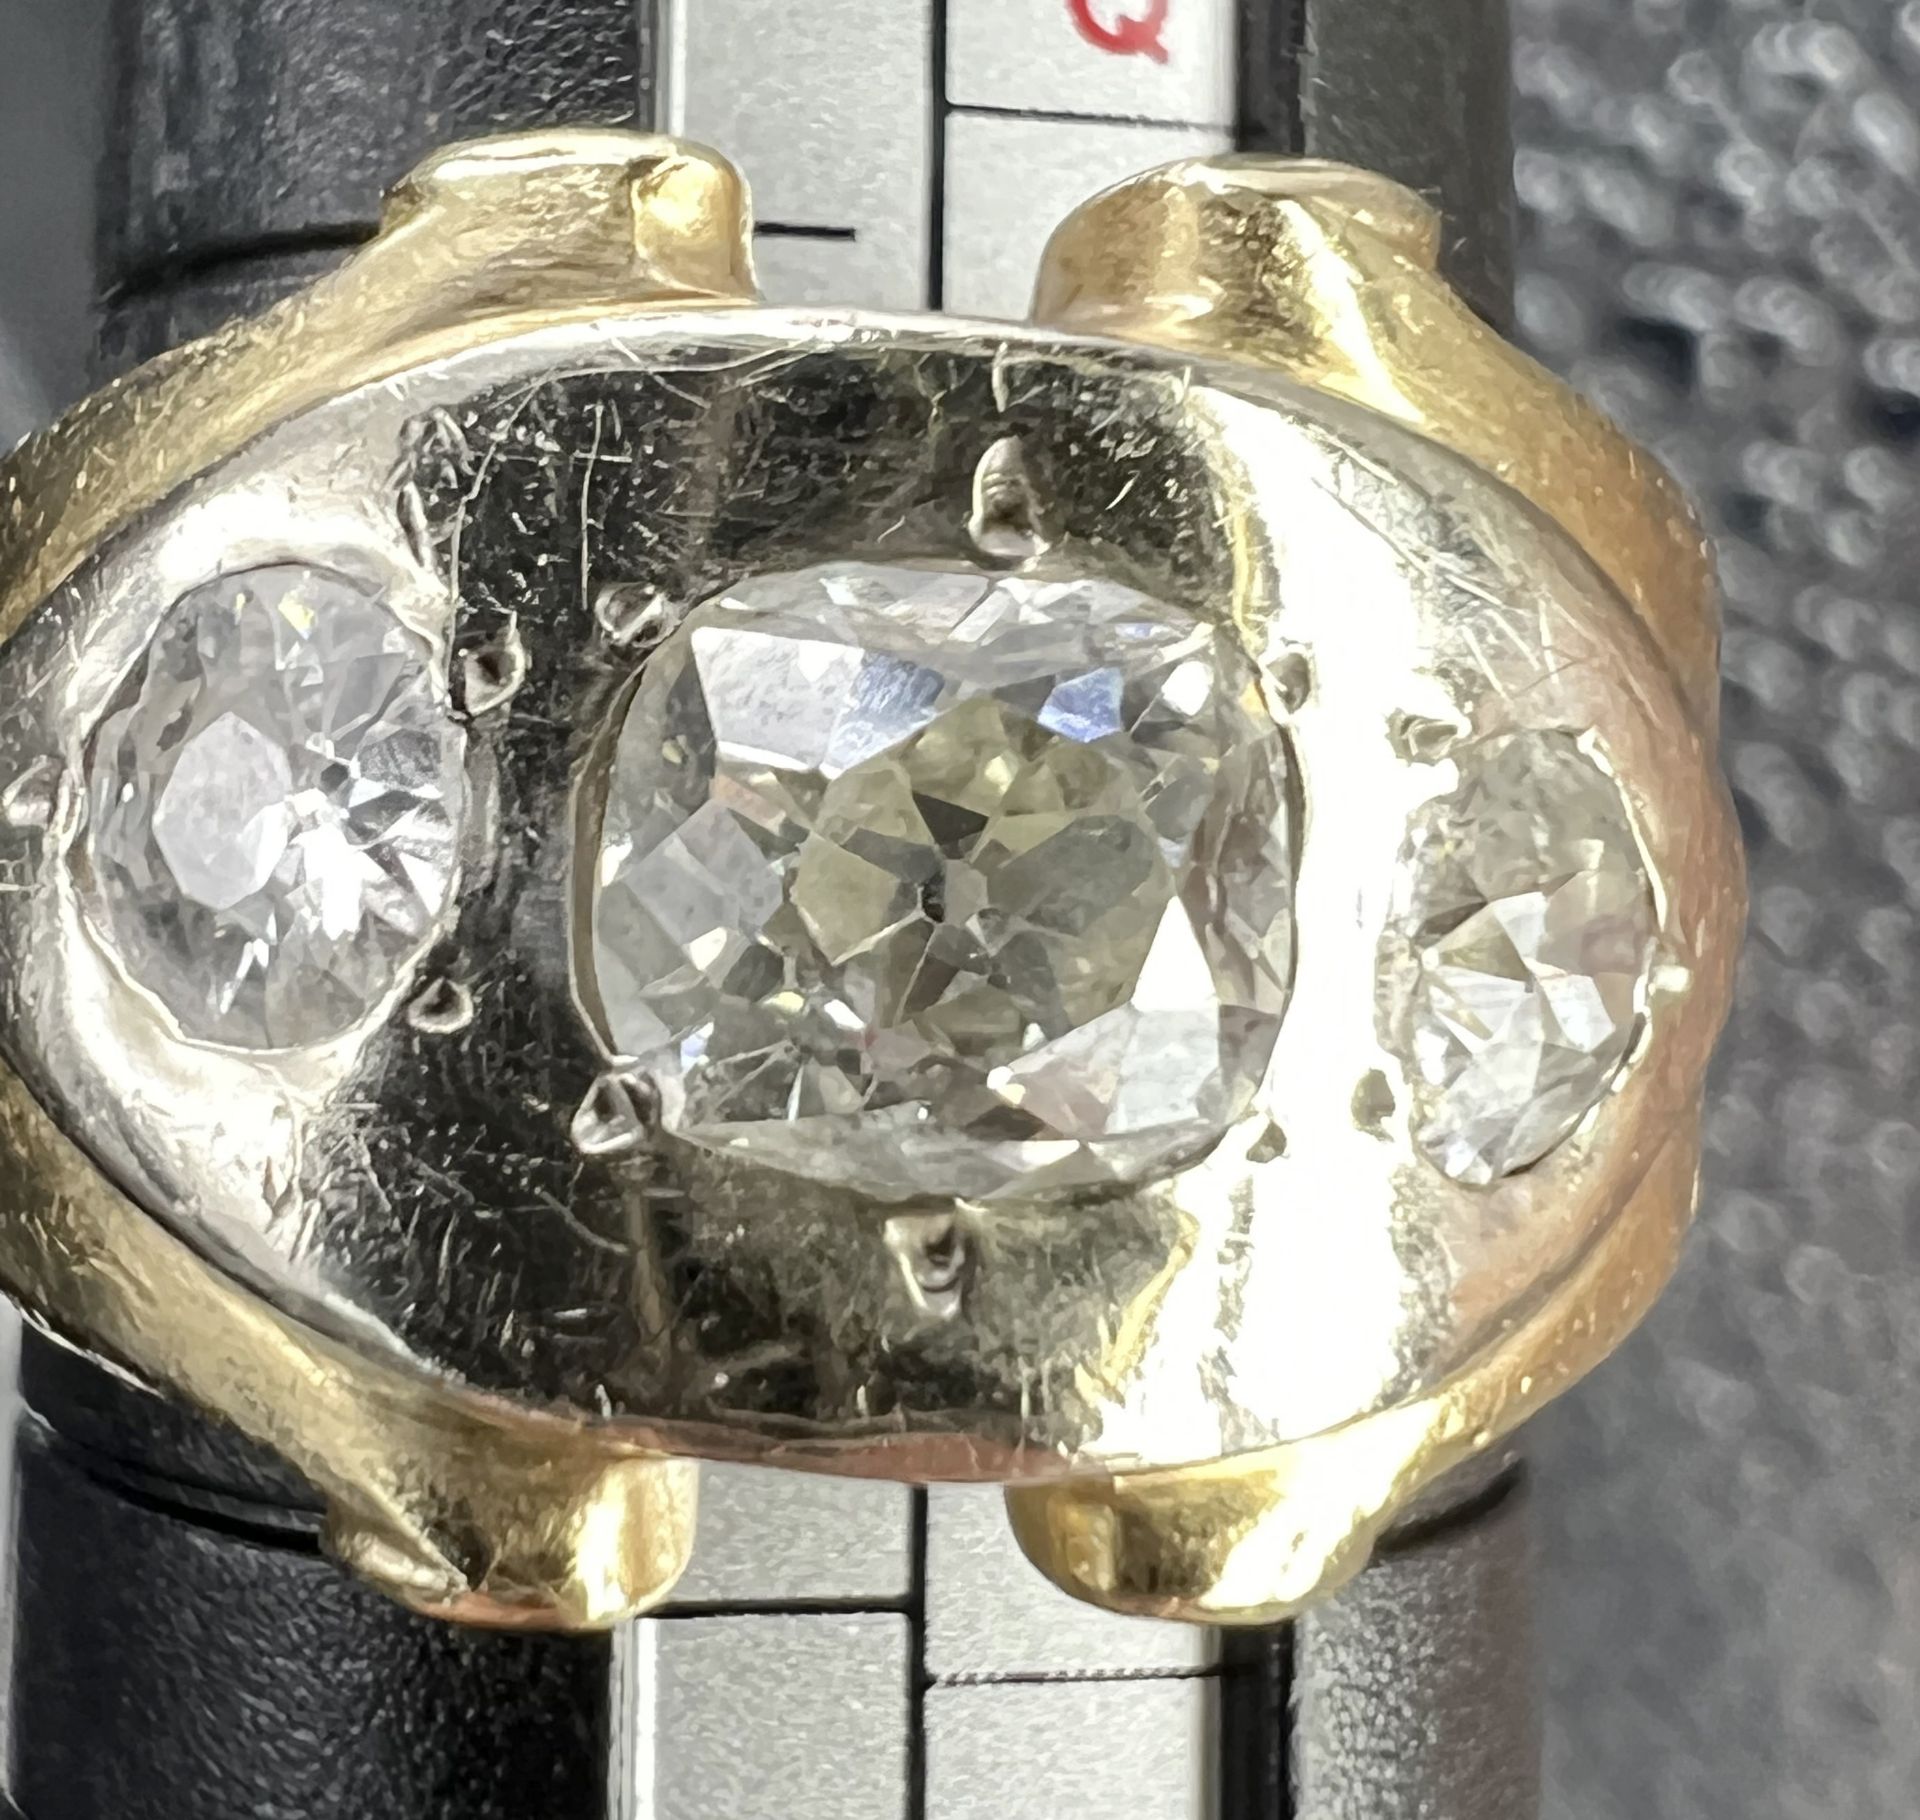 Ladies' ring. 585 yellow gold and white gold with 3 diamonds. - Image 6 of 11